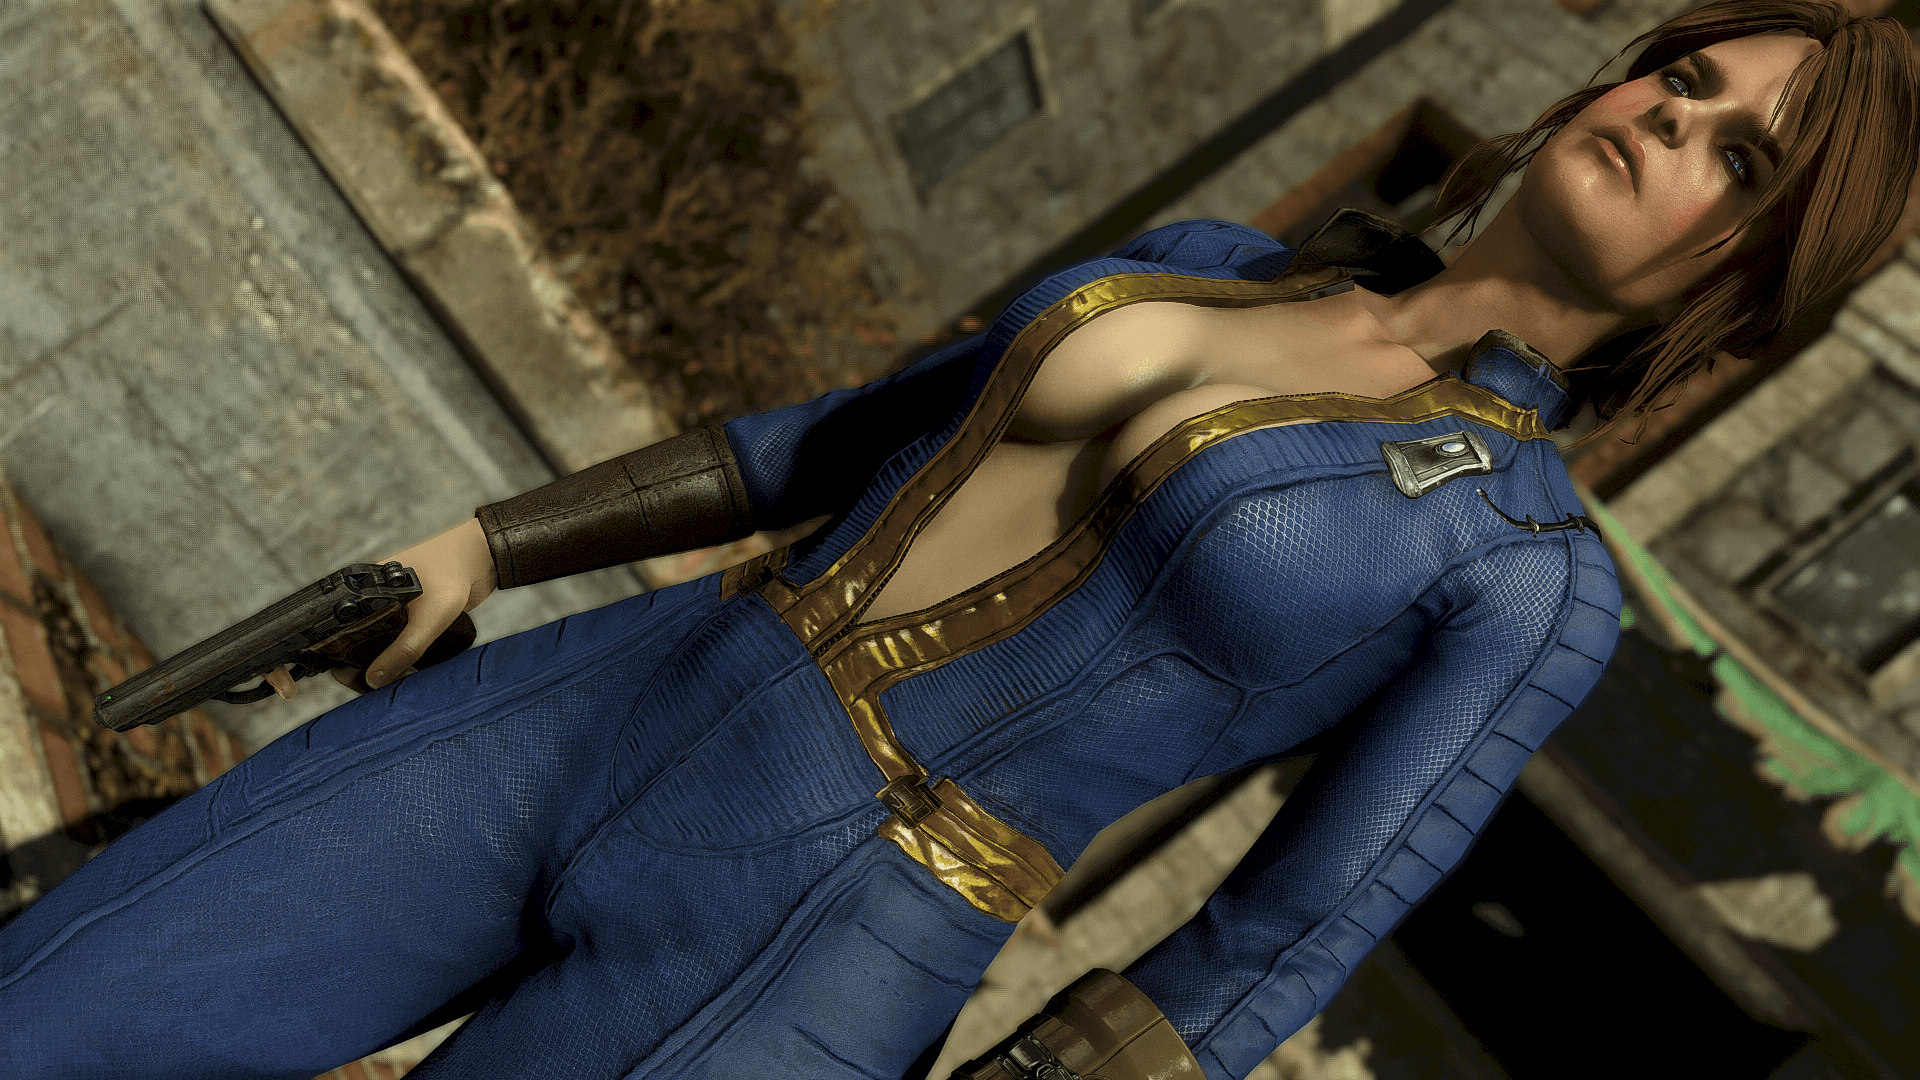 Unzipped Vault Suit - Vanilla Conversion by Femshepping - Conversion for WB...